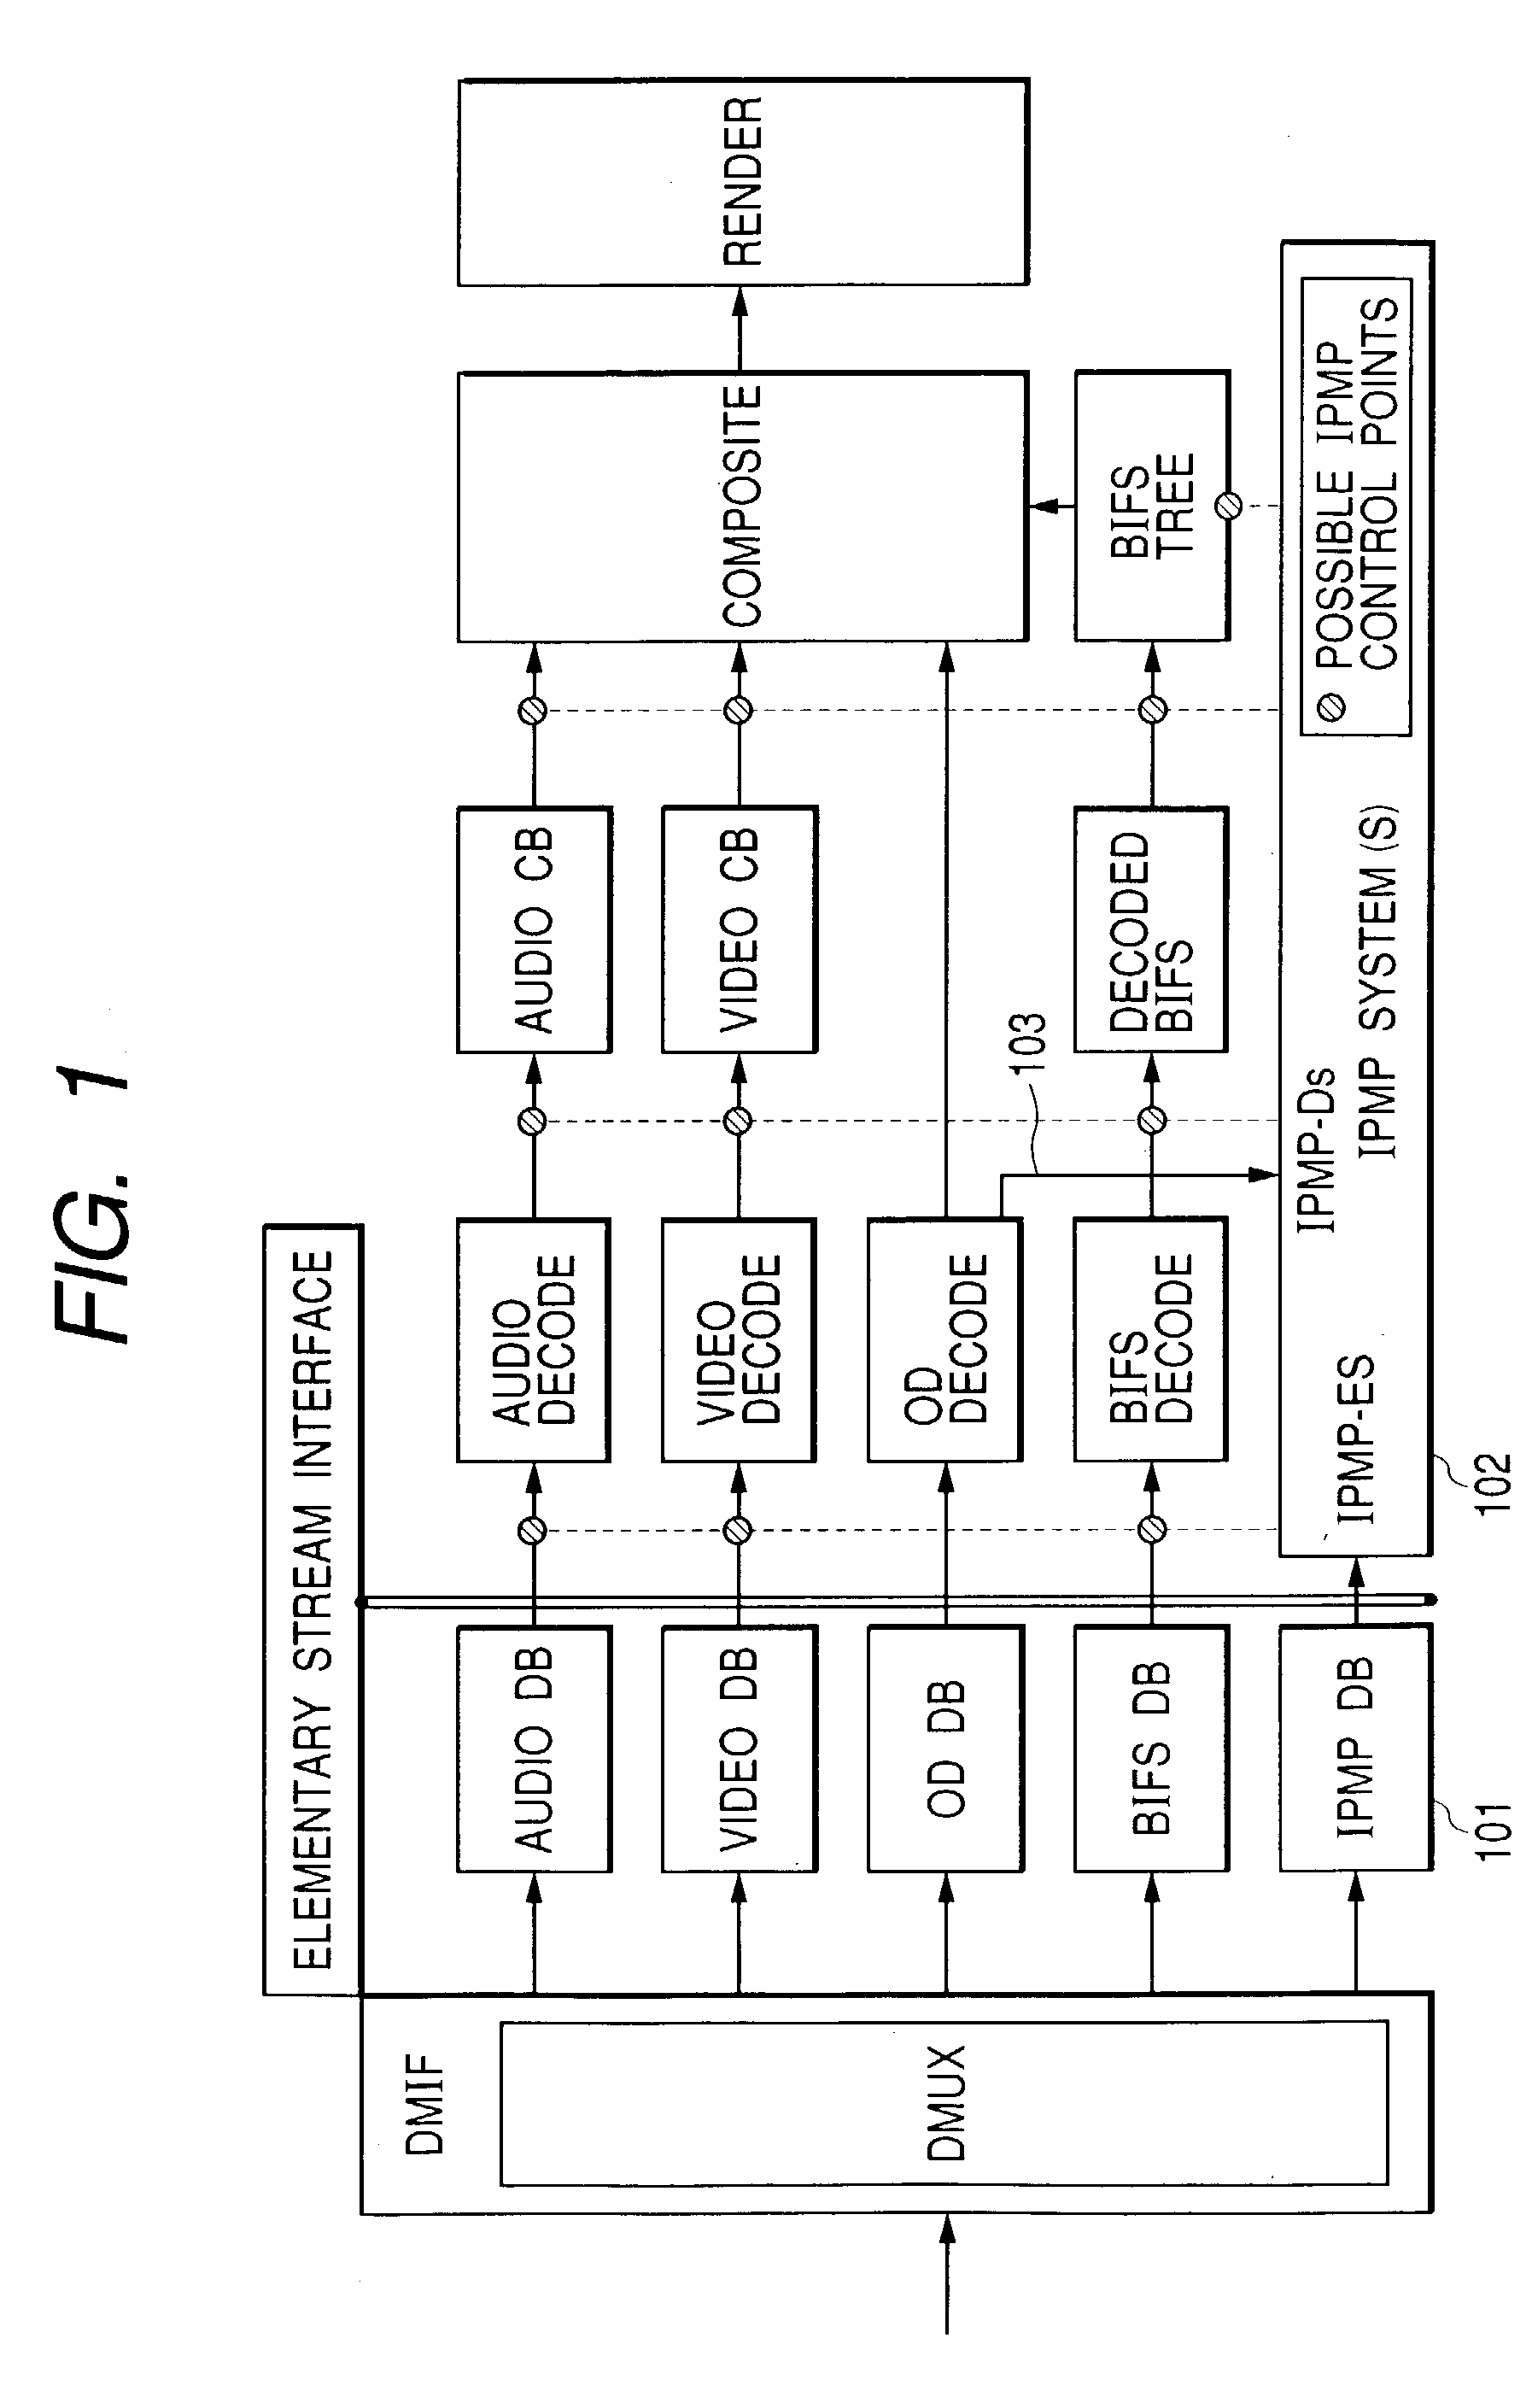 Contents forming method and contents reproducing apparatus and method